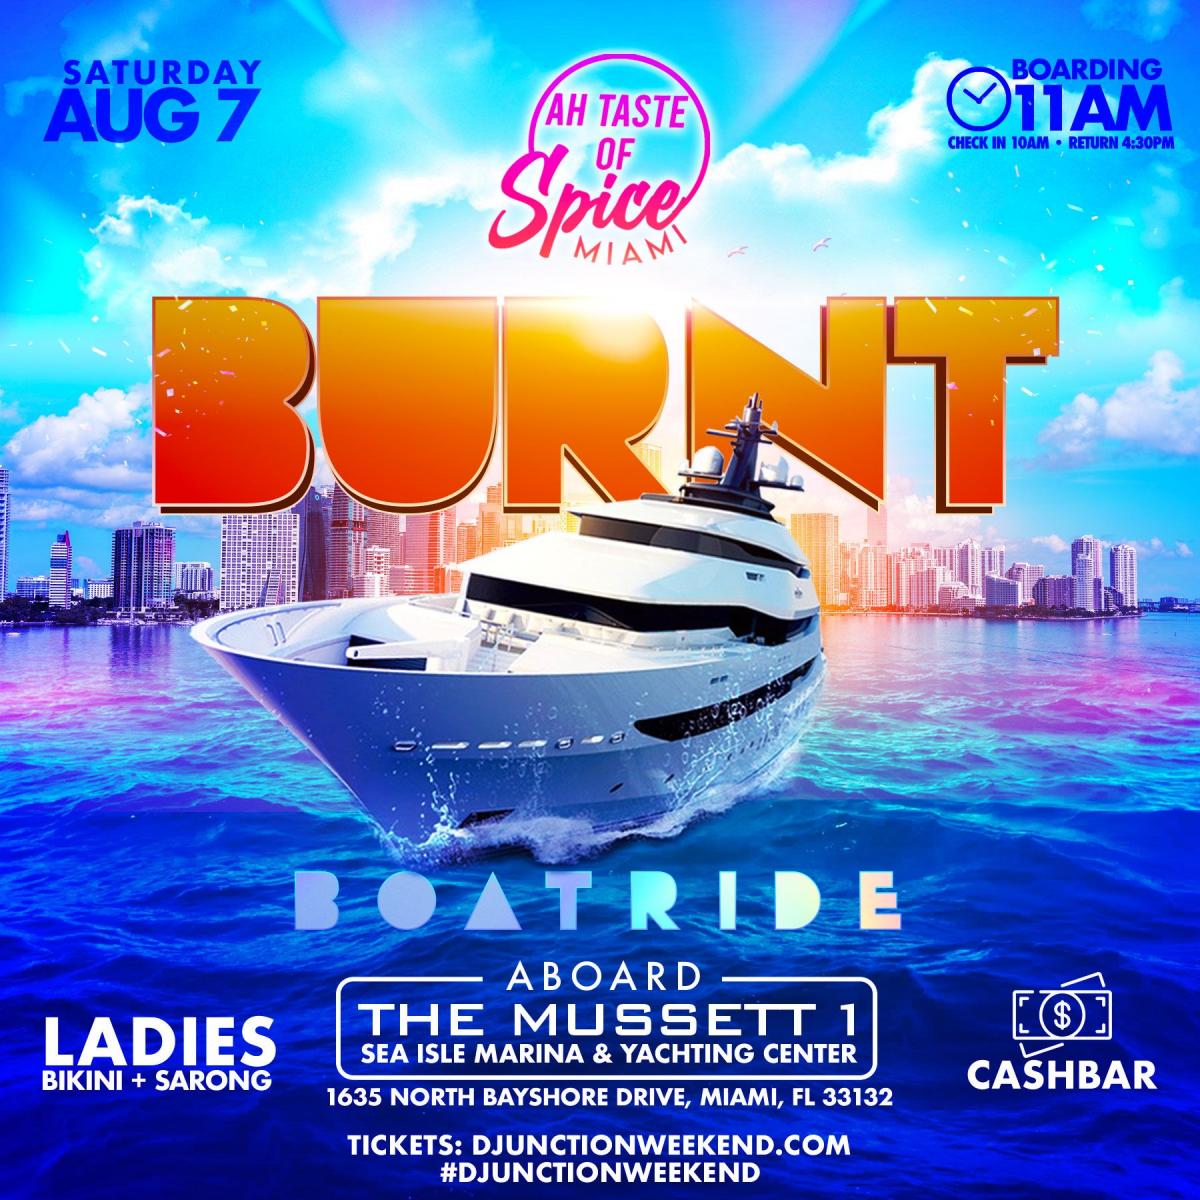 Burnt Boat Ride flyer or graphic.